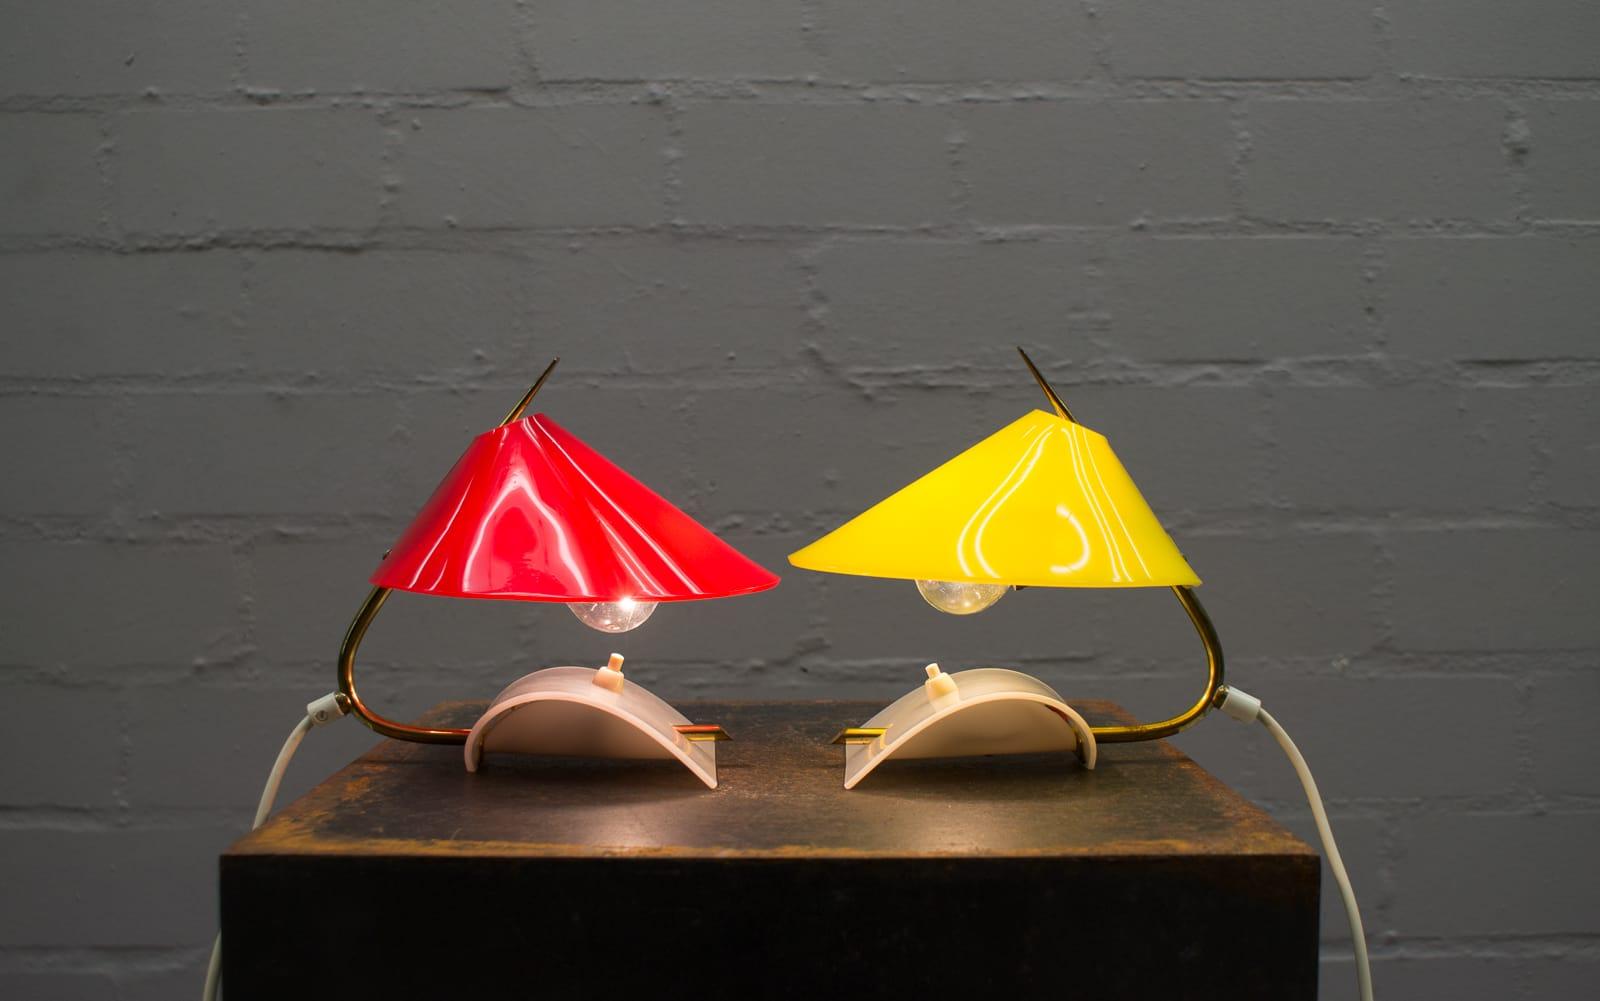 Pair of rare Mid-Century Modern table lamps. 
Lampshades are made of plexiglass one in yellow and one in red. 
Very beautiful 1950s design in good vintage condition. 
100% original condition and fully functional. Makes a fantastically beautiful